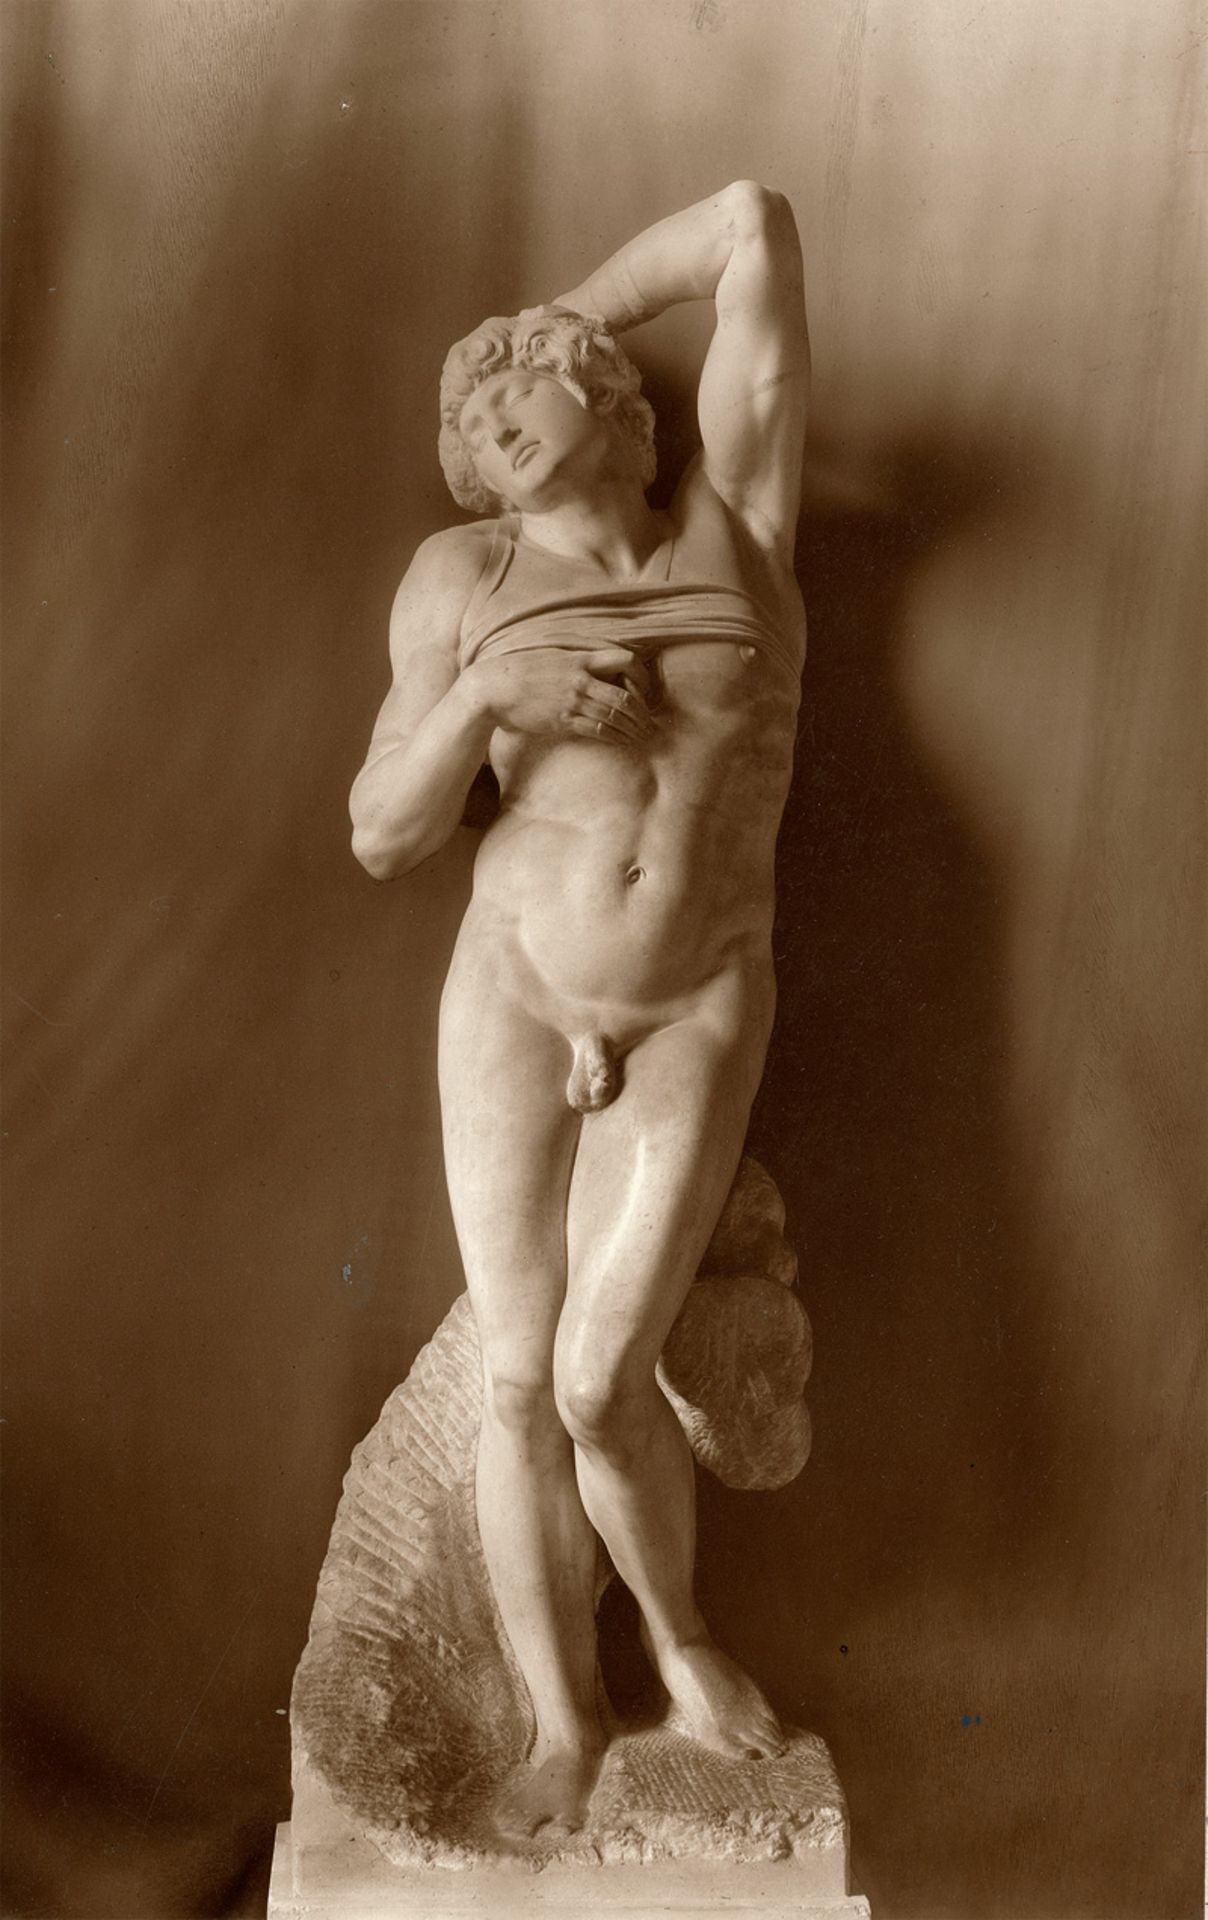 Braun & Cie., Adolphe: Michelangelo's "Dying Slave" and "Rebellious Slave"